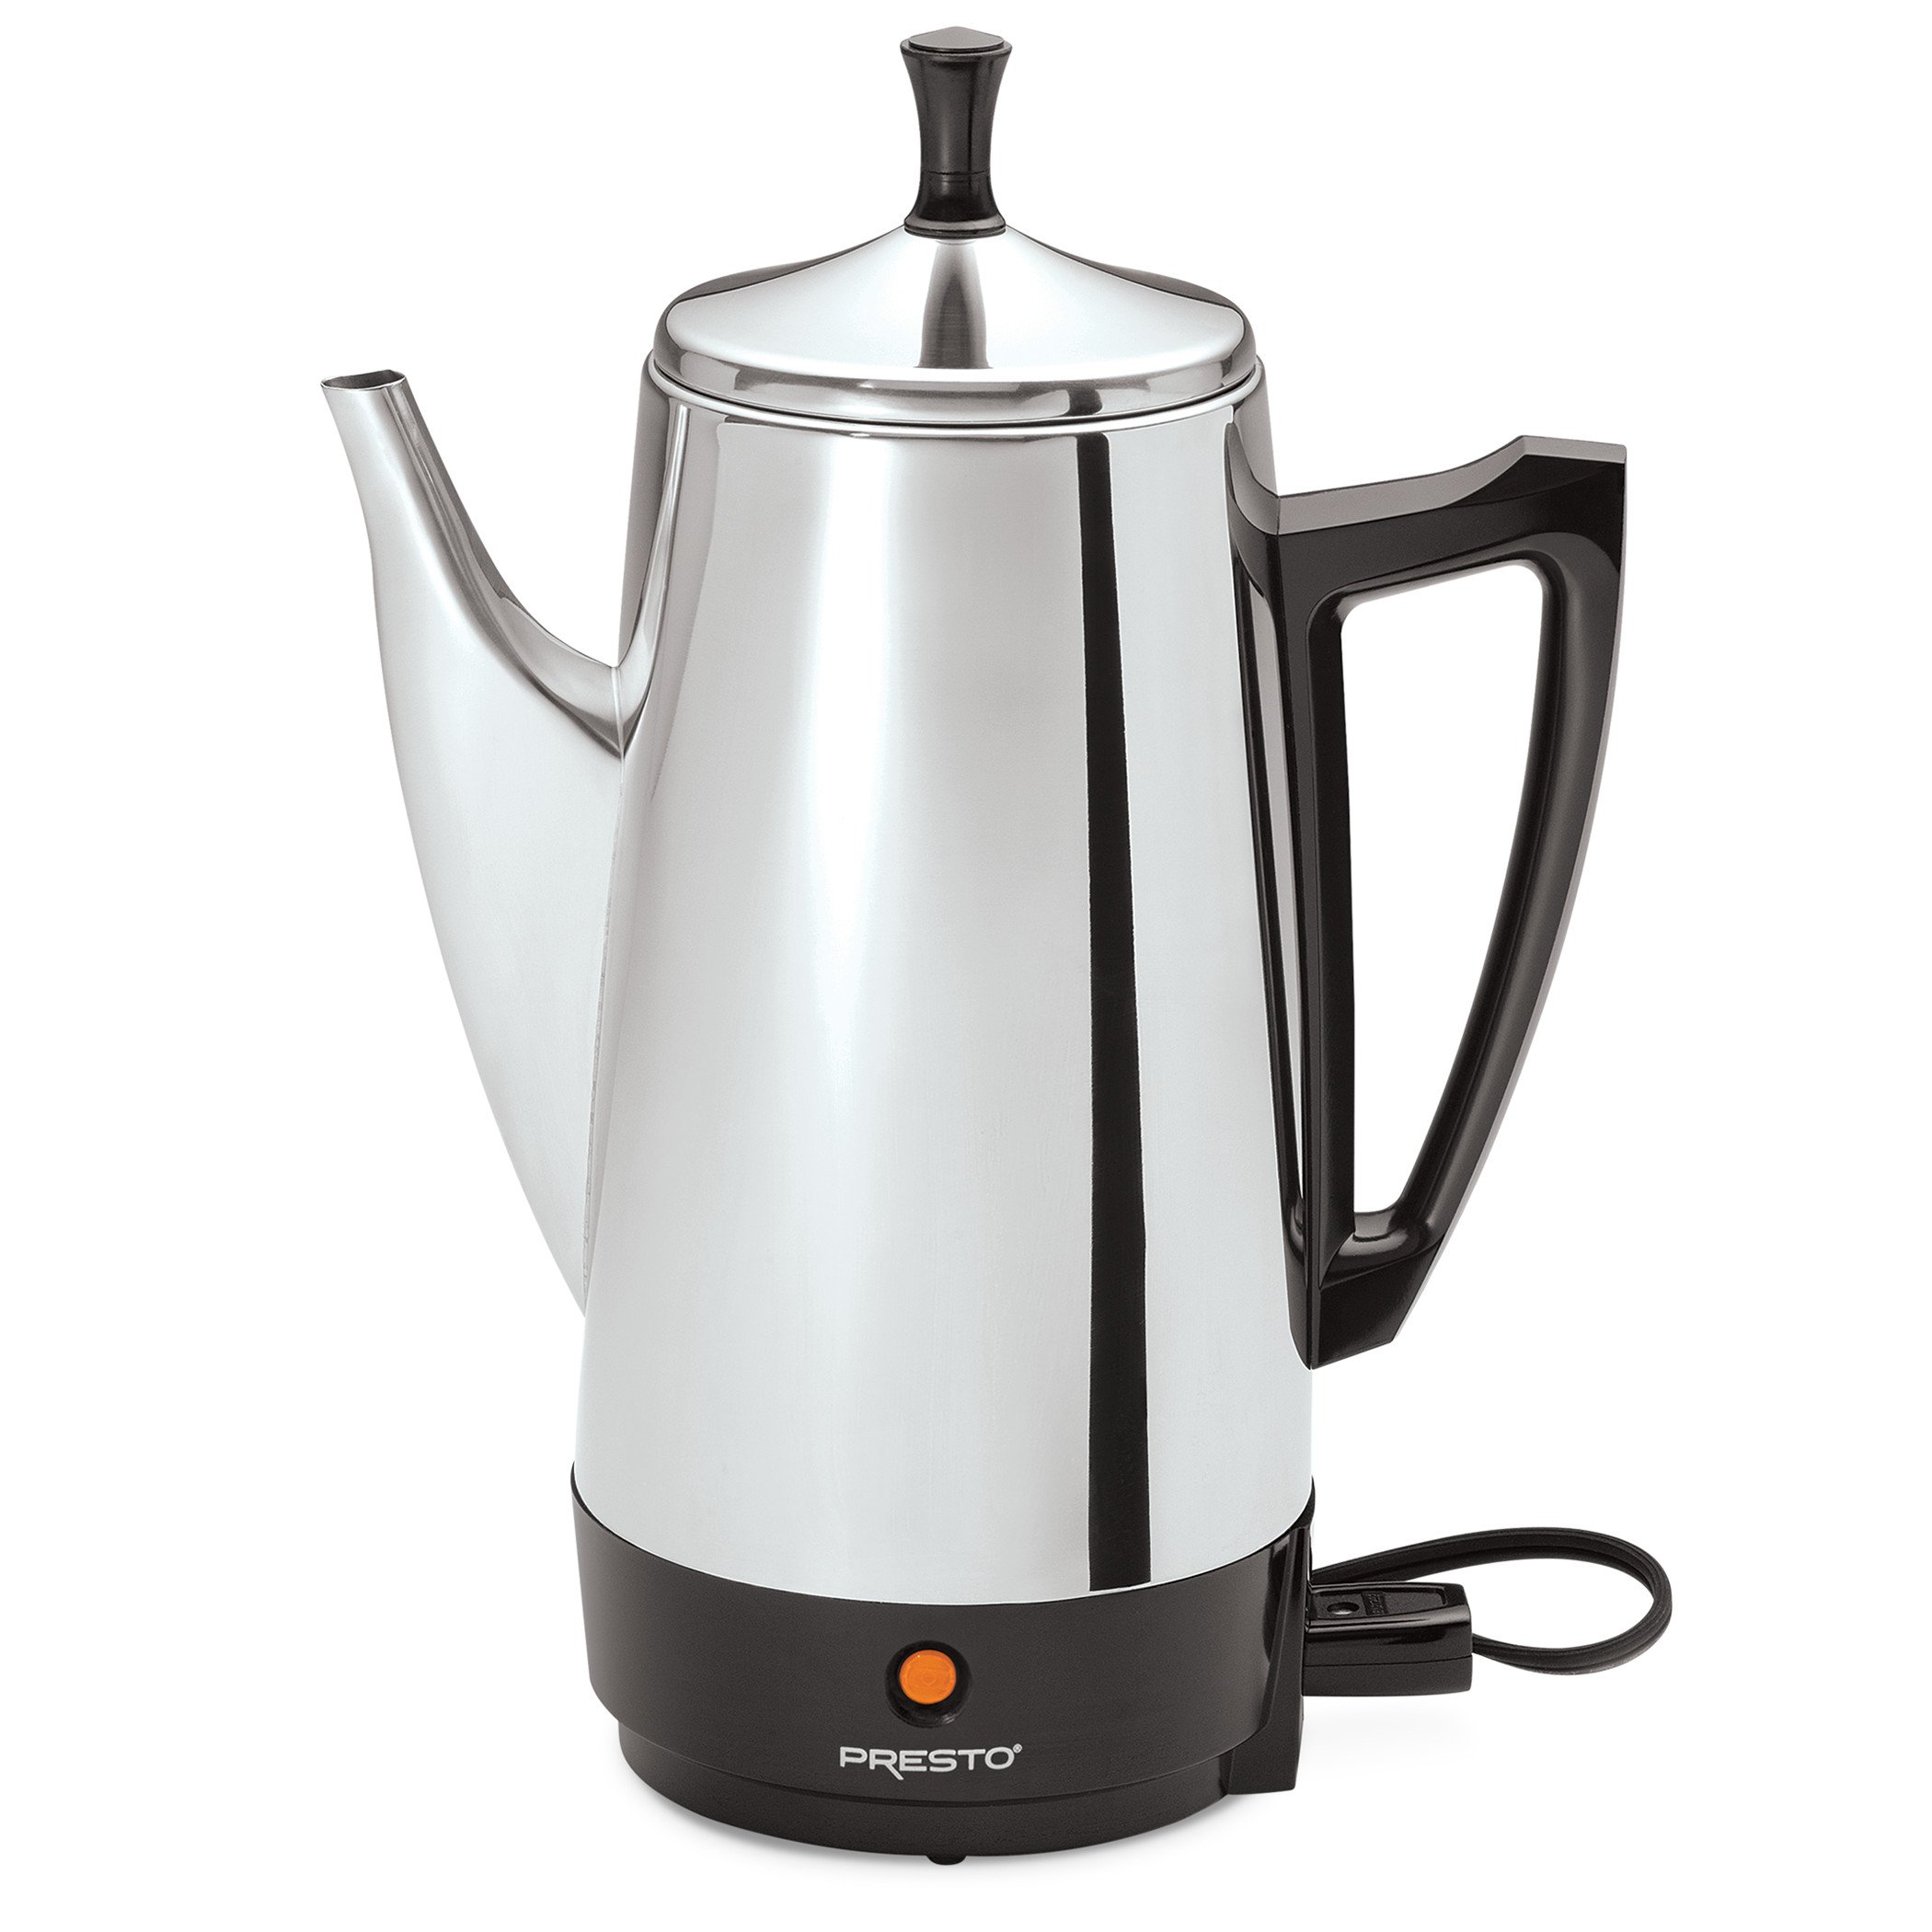 Presto12-Cup Stainless Steel Coffee Maker